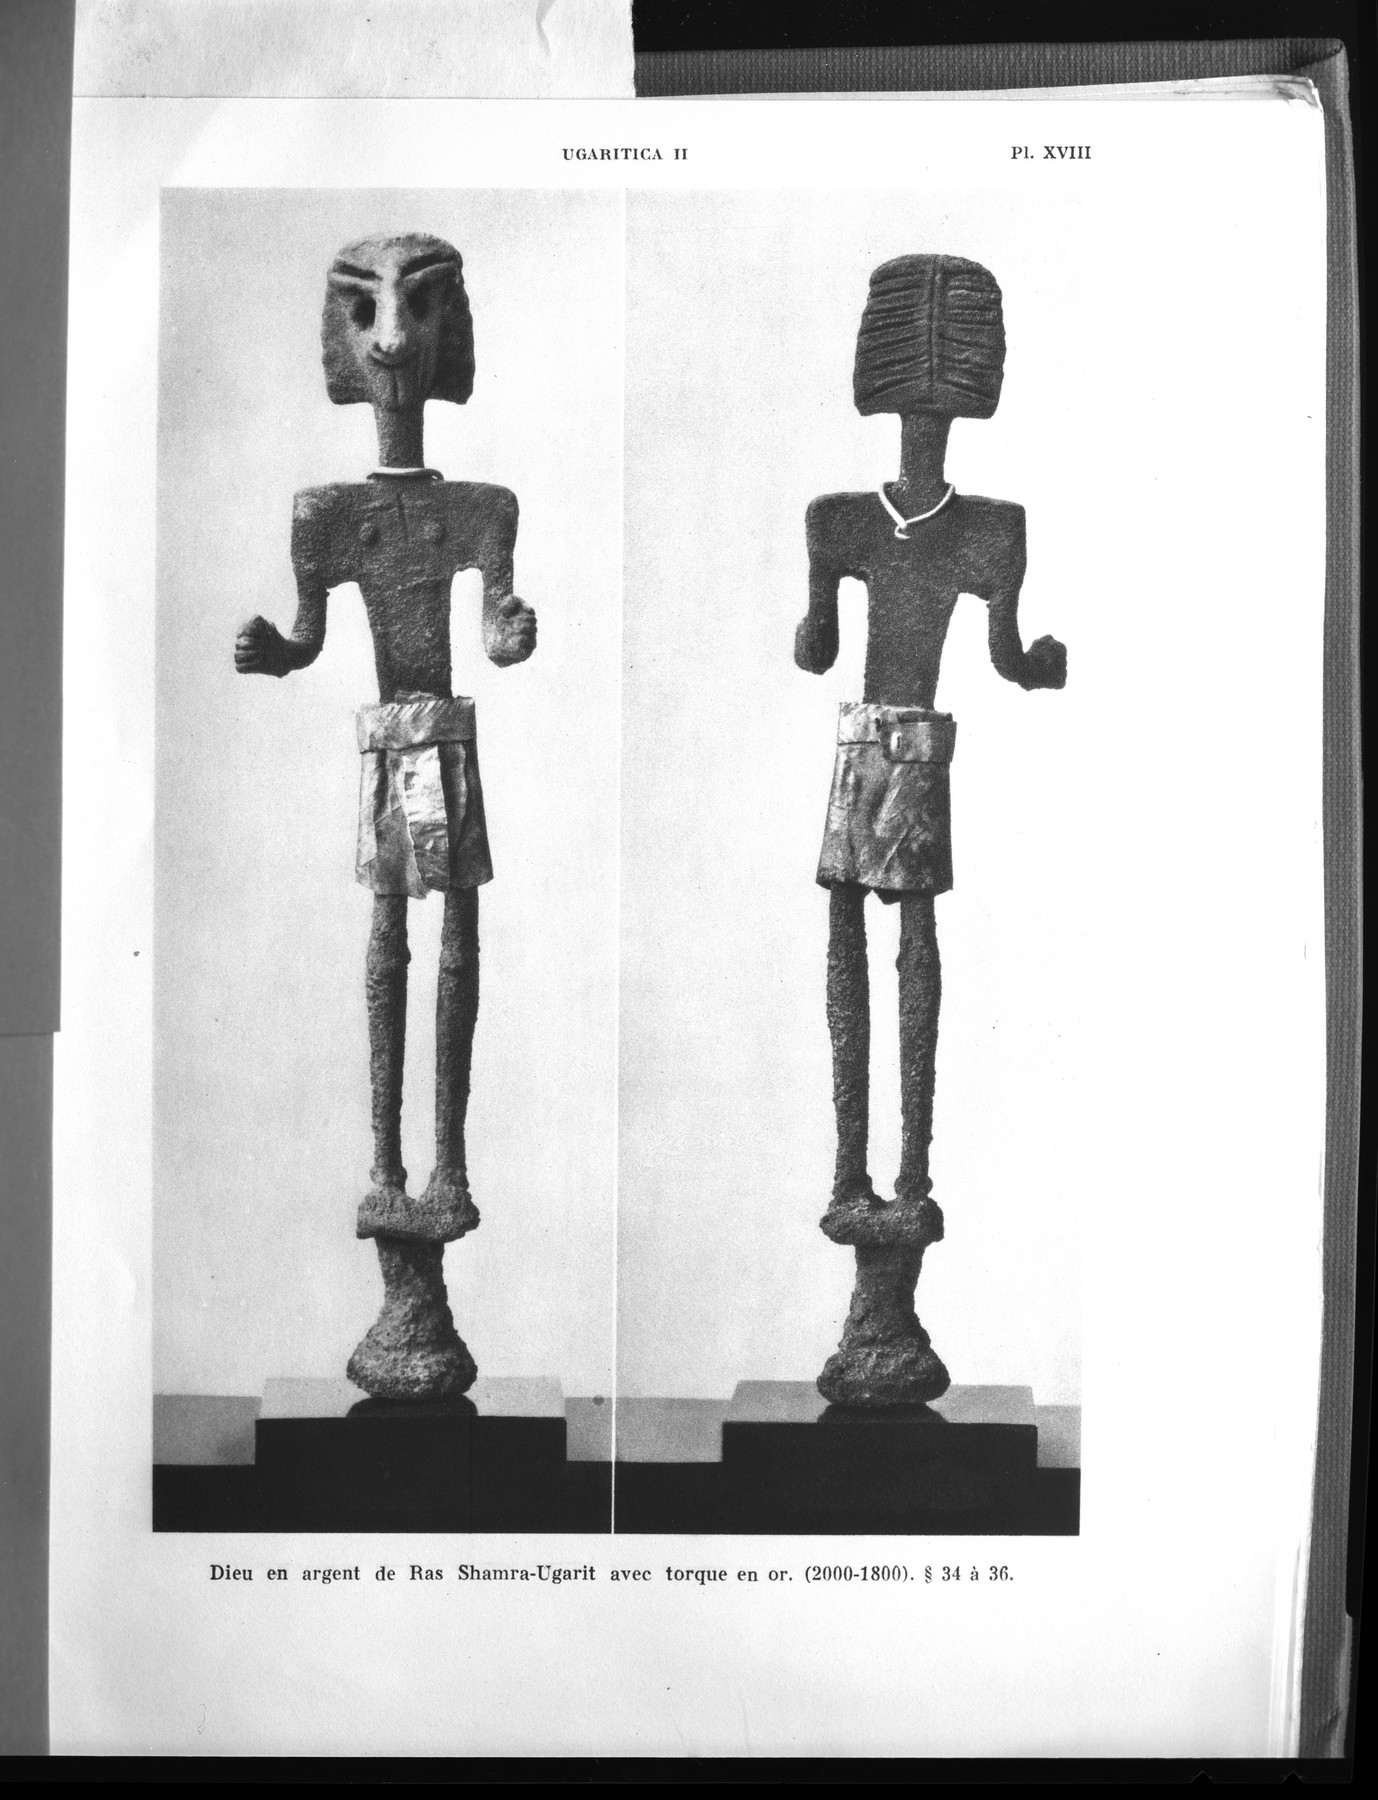 Image for Male Votive Figure of Baal